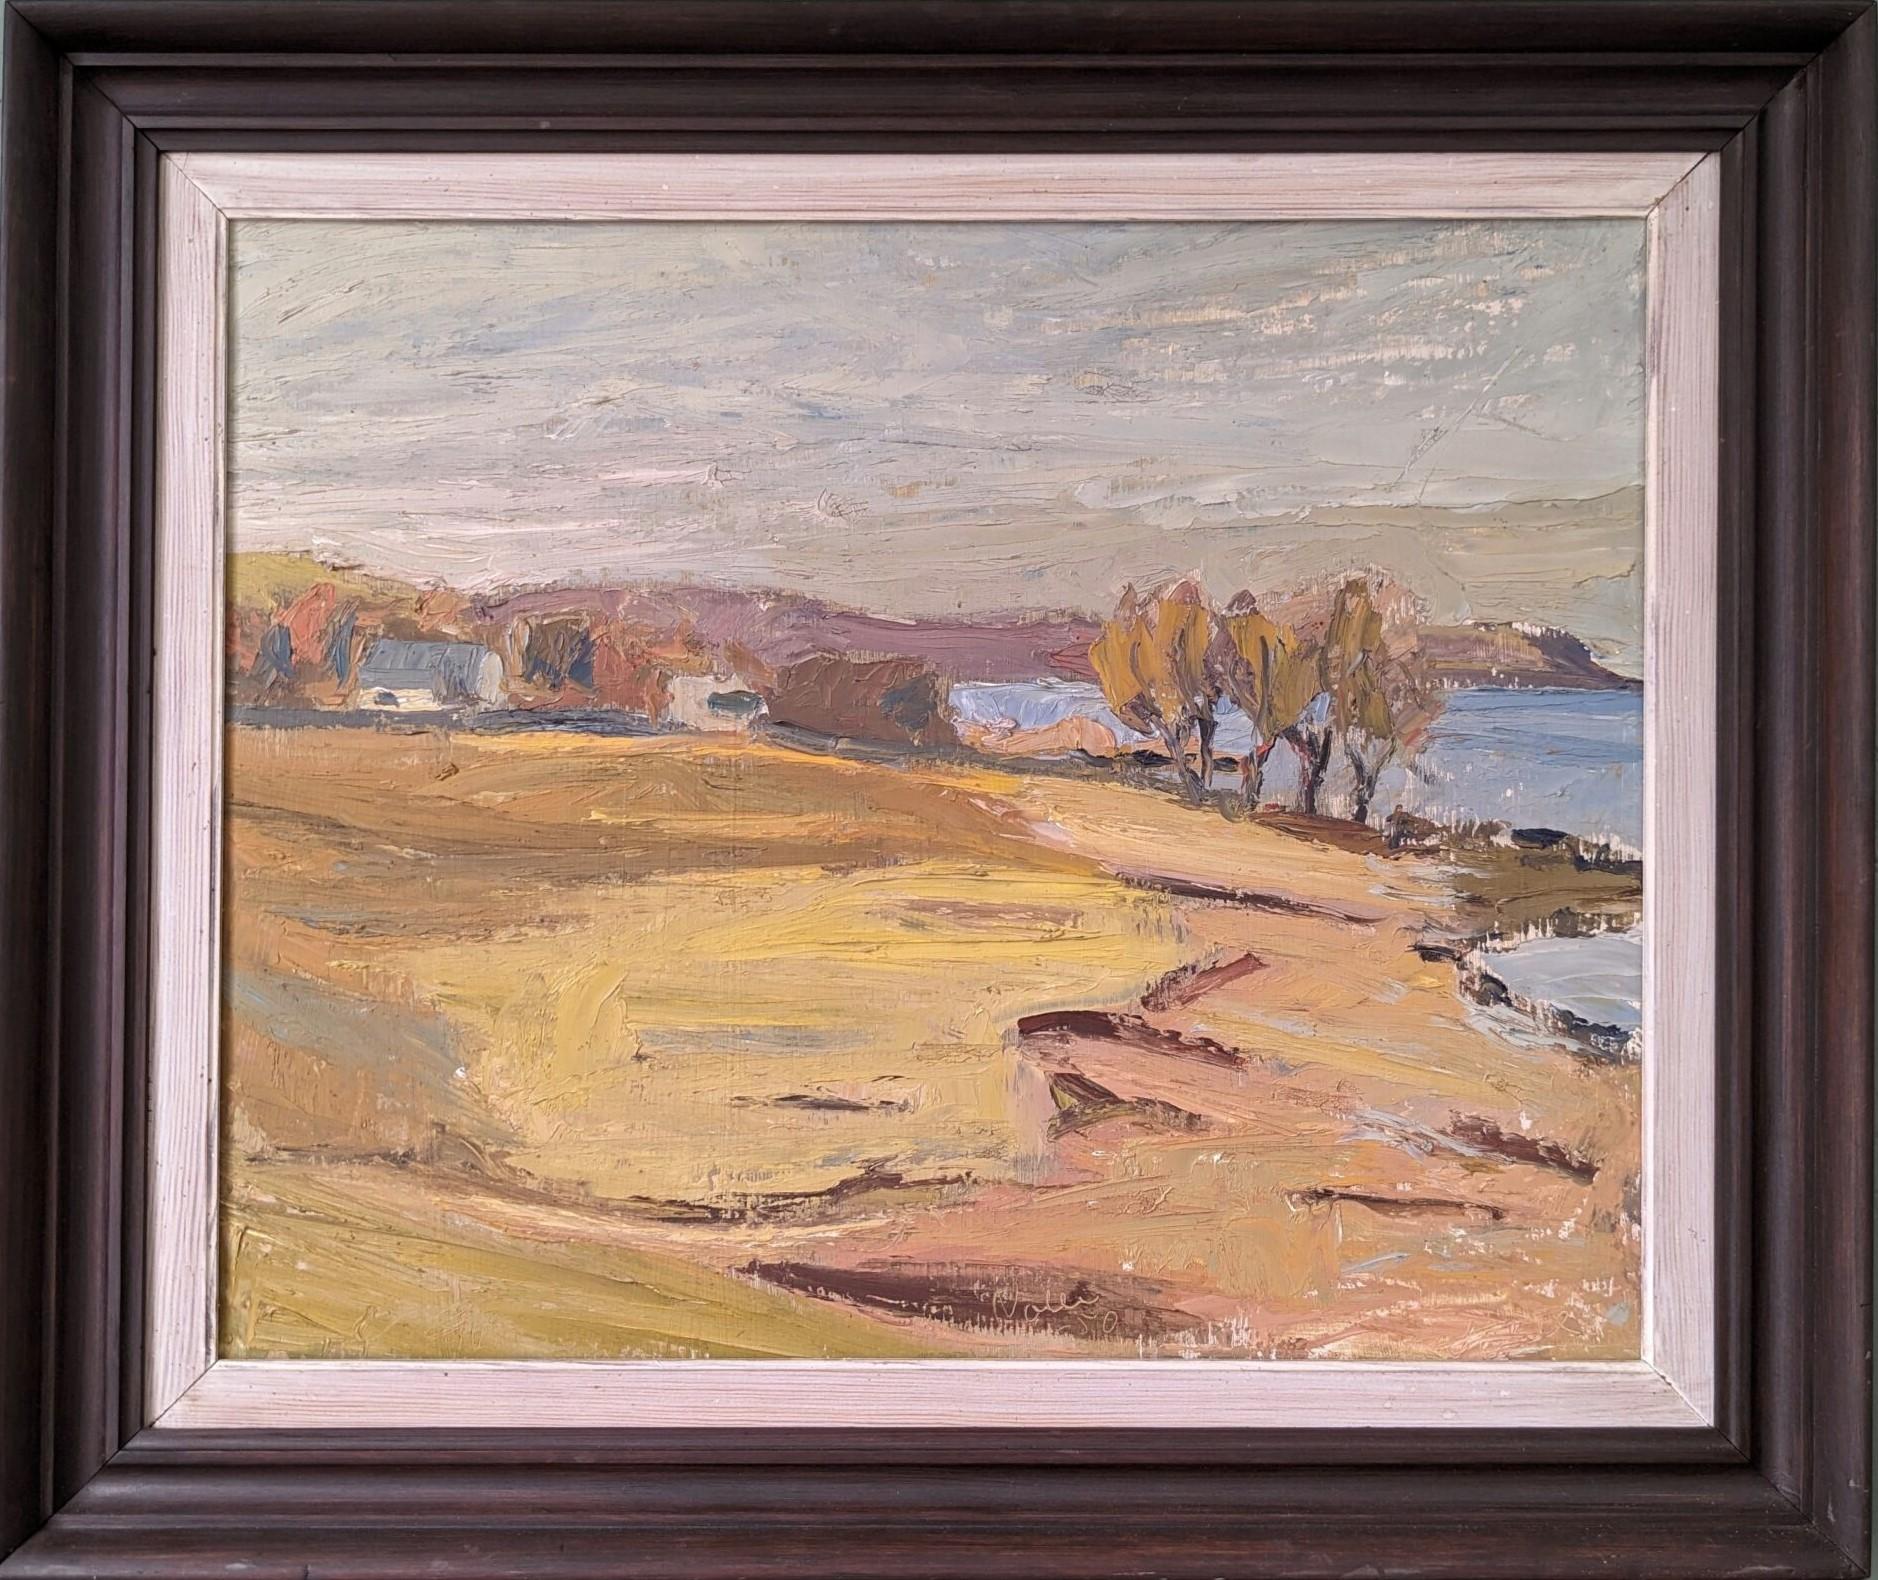 Unknown Landscape Painting - 1950 Mid-Century Modern Swedish Landscape Oil Painting - Golden Meadows, Framed